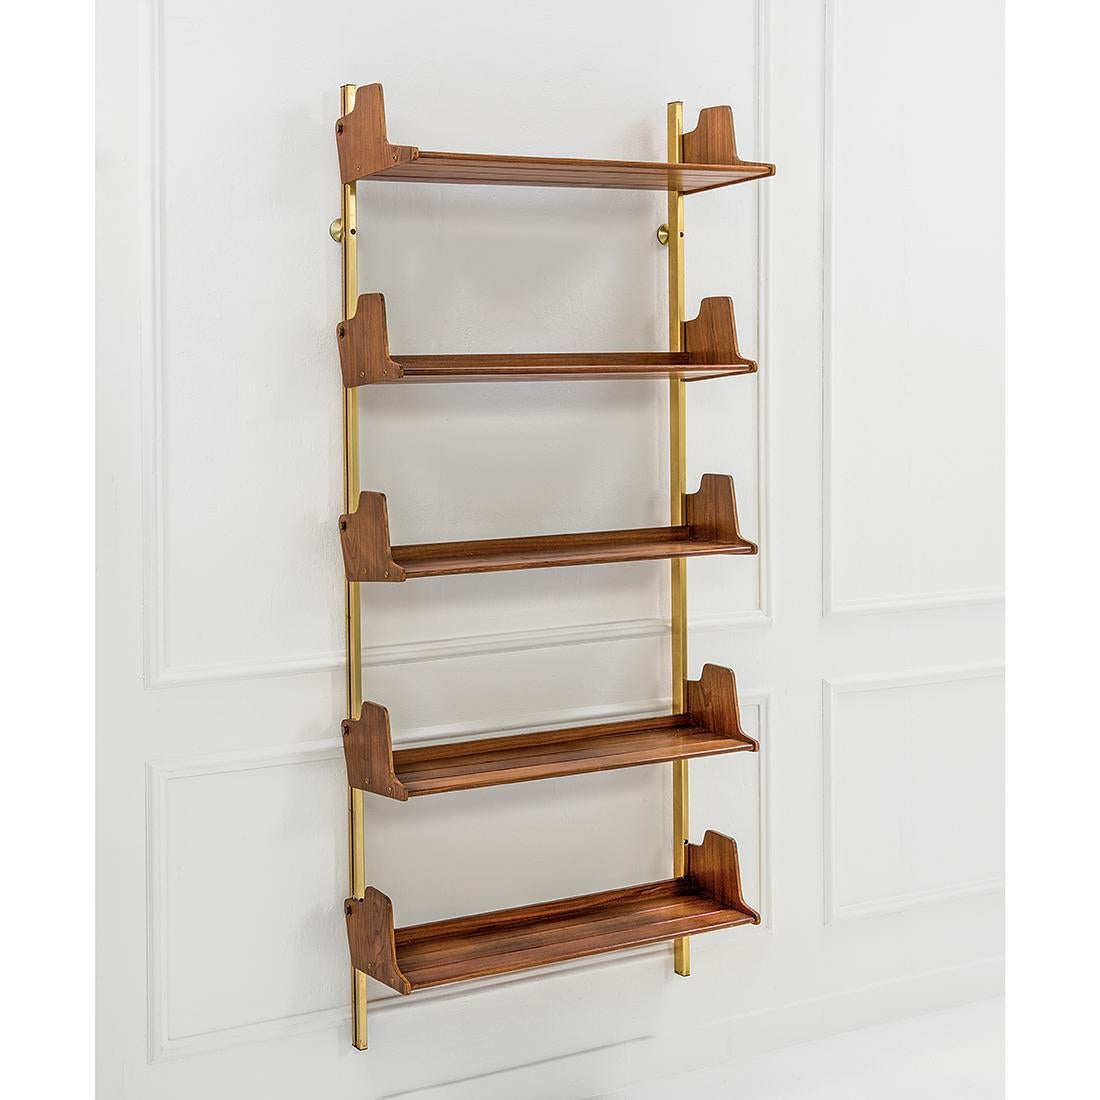 Elegant shelving unit Model E60 designed by Osvaldo Borsani for Tecno. The shelves can be moved up and down as required. The bottom shelf is slightly deeper than the others which visually anchors the unit to the ground. The shelves are in teak. This